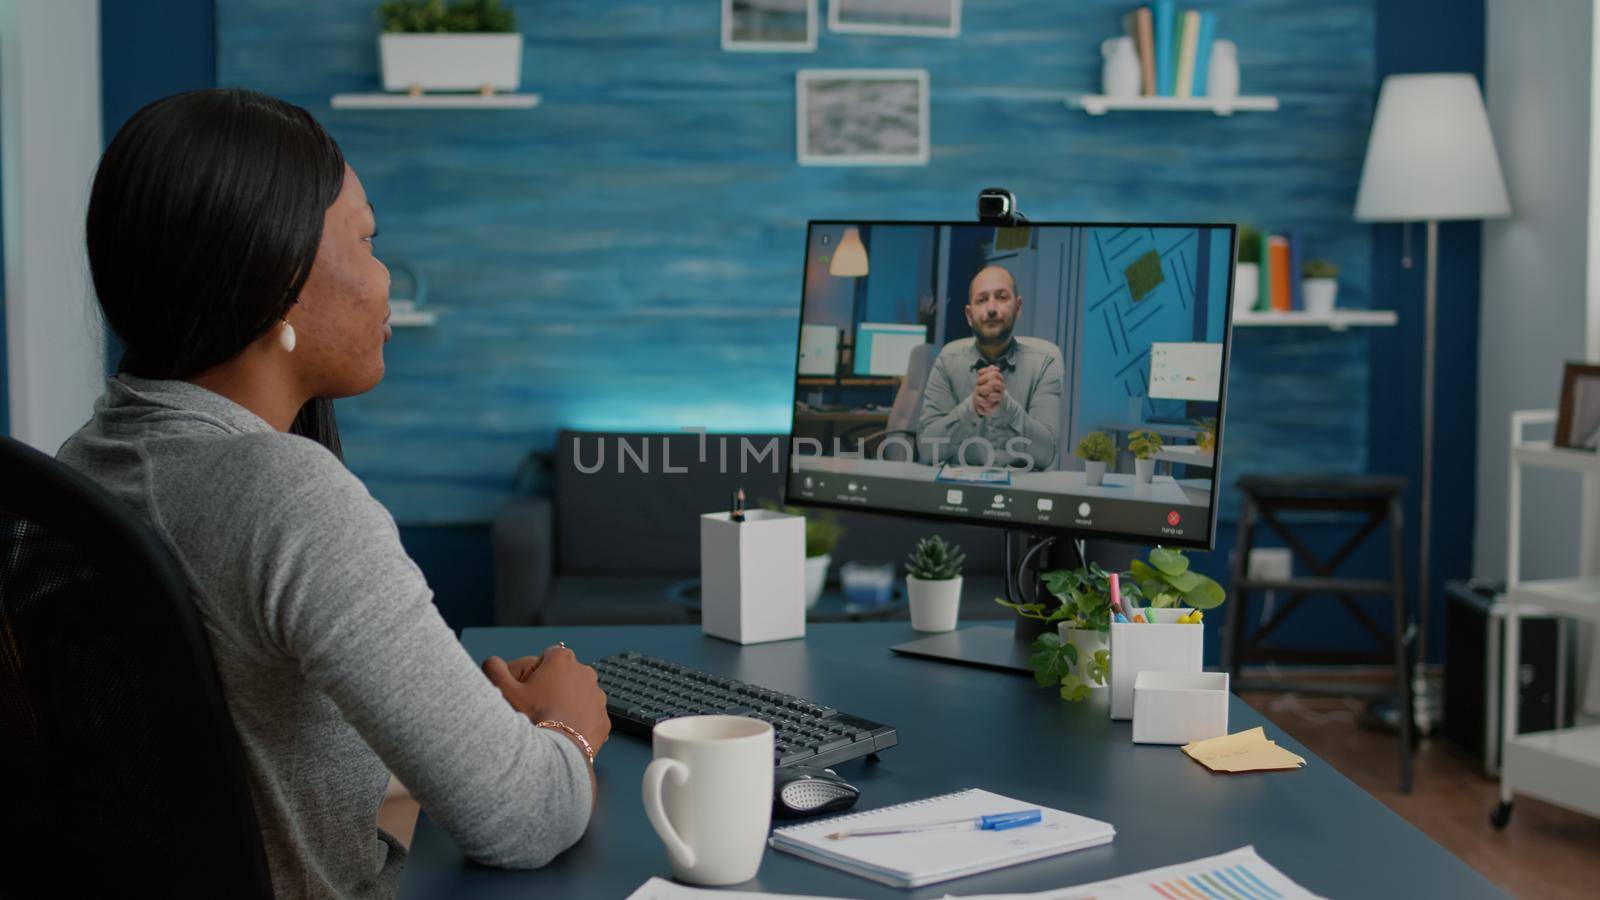 Smart black student working at marketing deadline project discussing academic ideas with entrepreneur during online videocall teleconference meeting. Woman sitting at desk using high school webinar